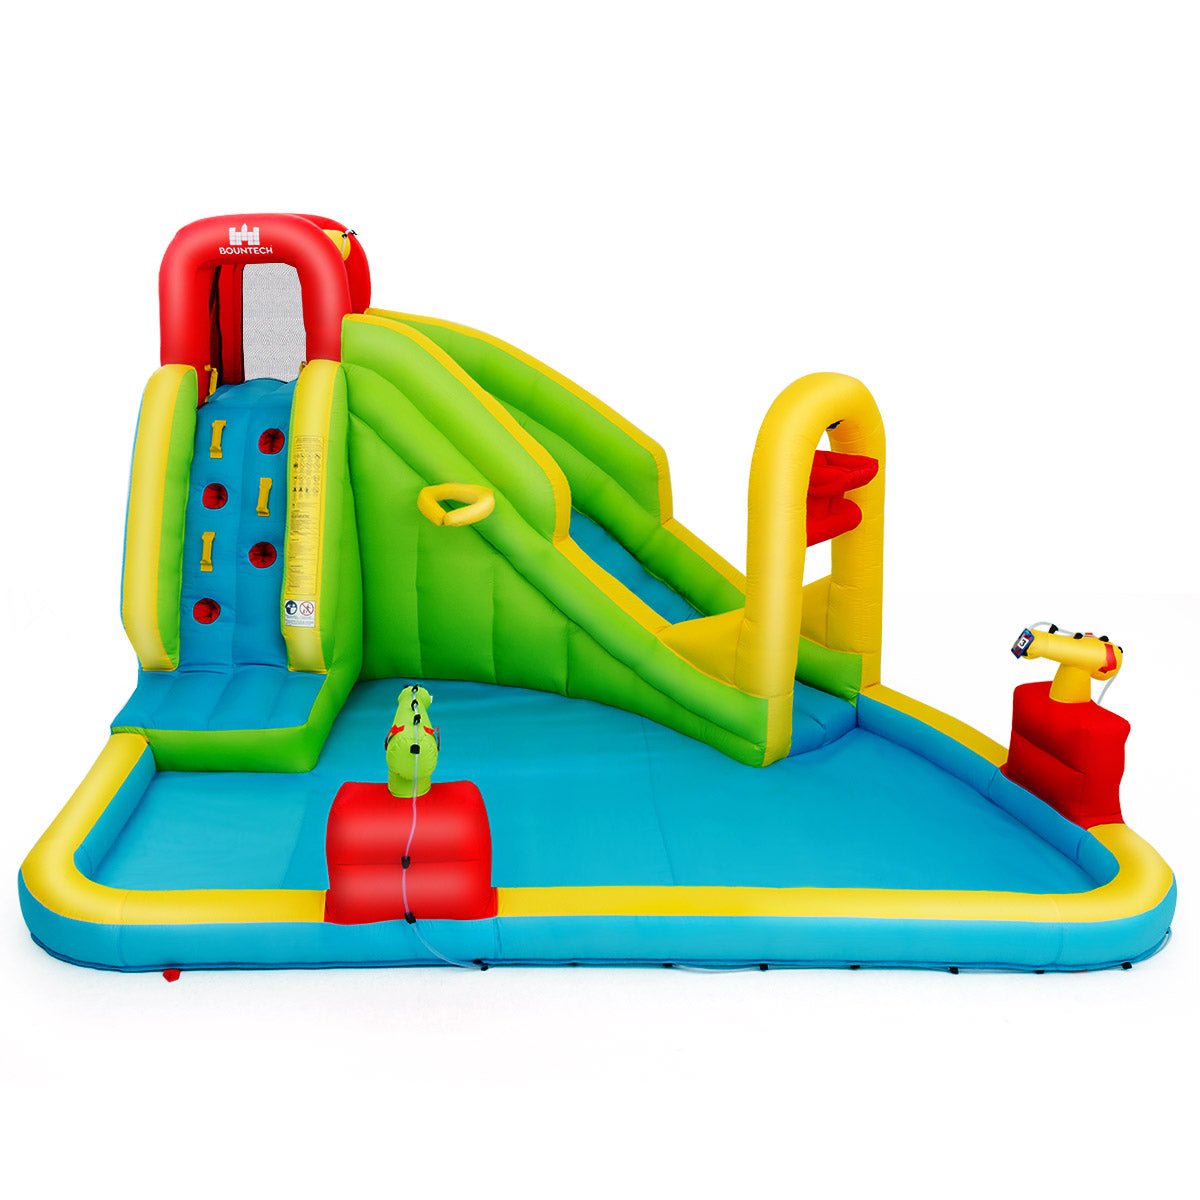 Aquatic Adventure: Inflatable Water Slide with Pool, Climbing Wall & Water Gun